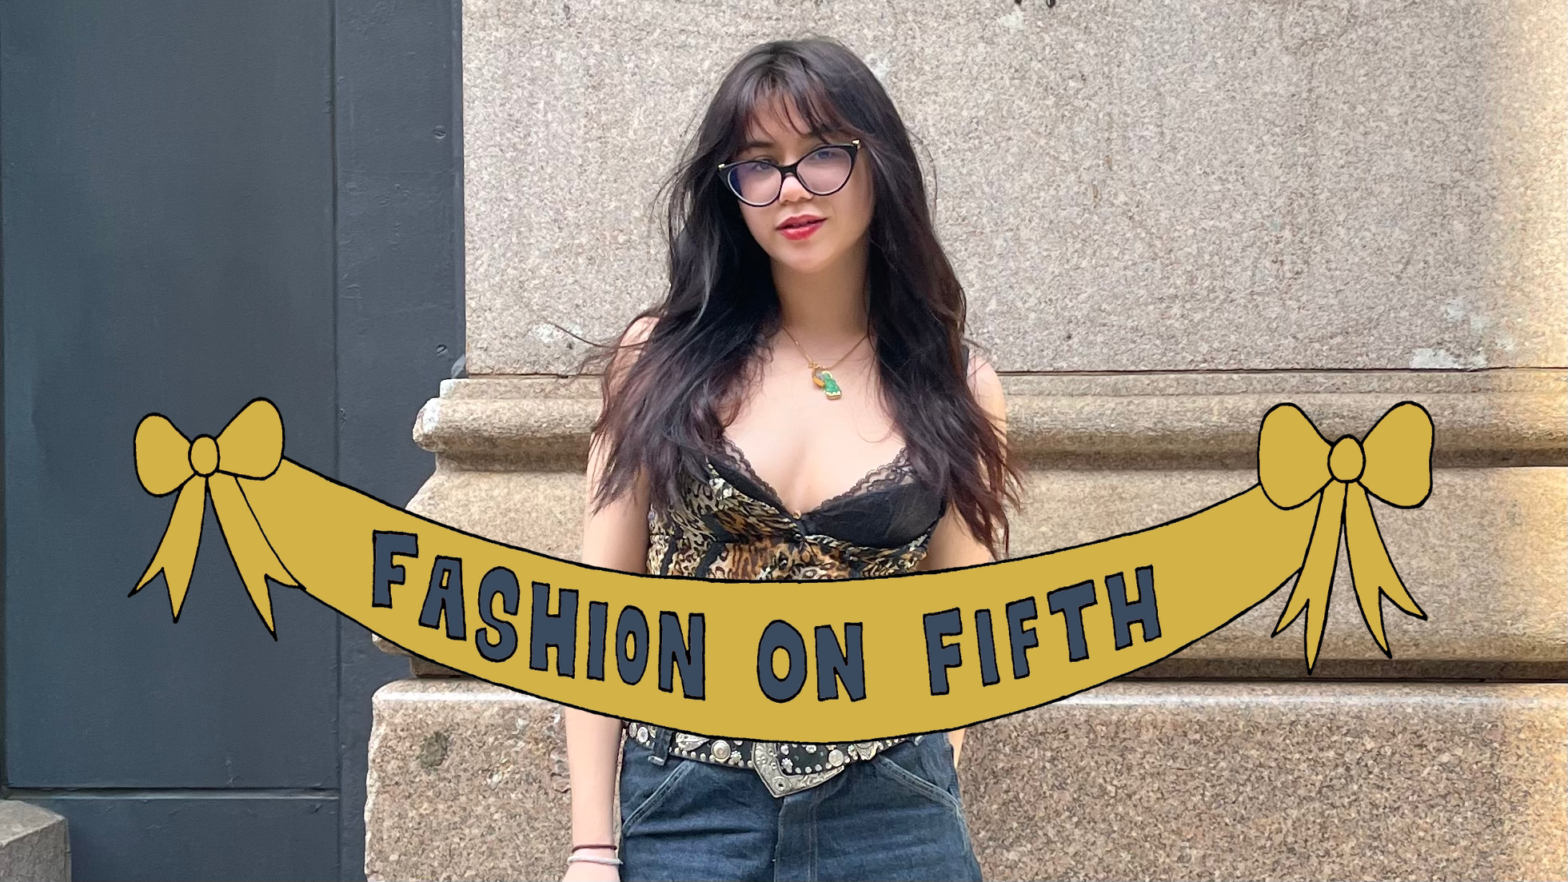 A young female student with glasses and long brown hair wears a leopard print tank top, a bedazzled belt, and jean shorts behind a yellow banner that says “Fashion on Fifth” in bold blue letters.